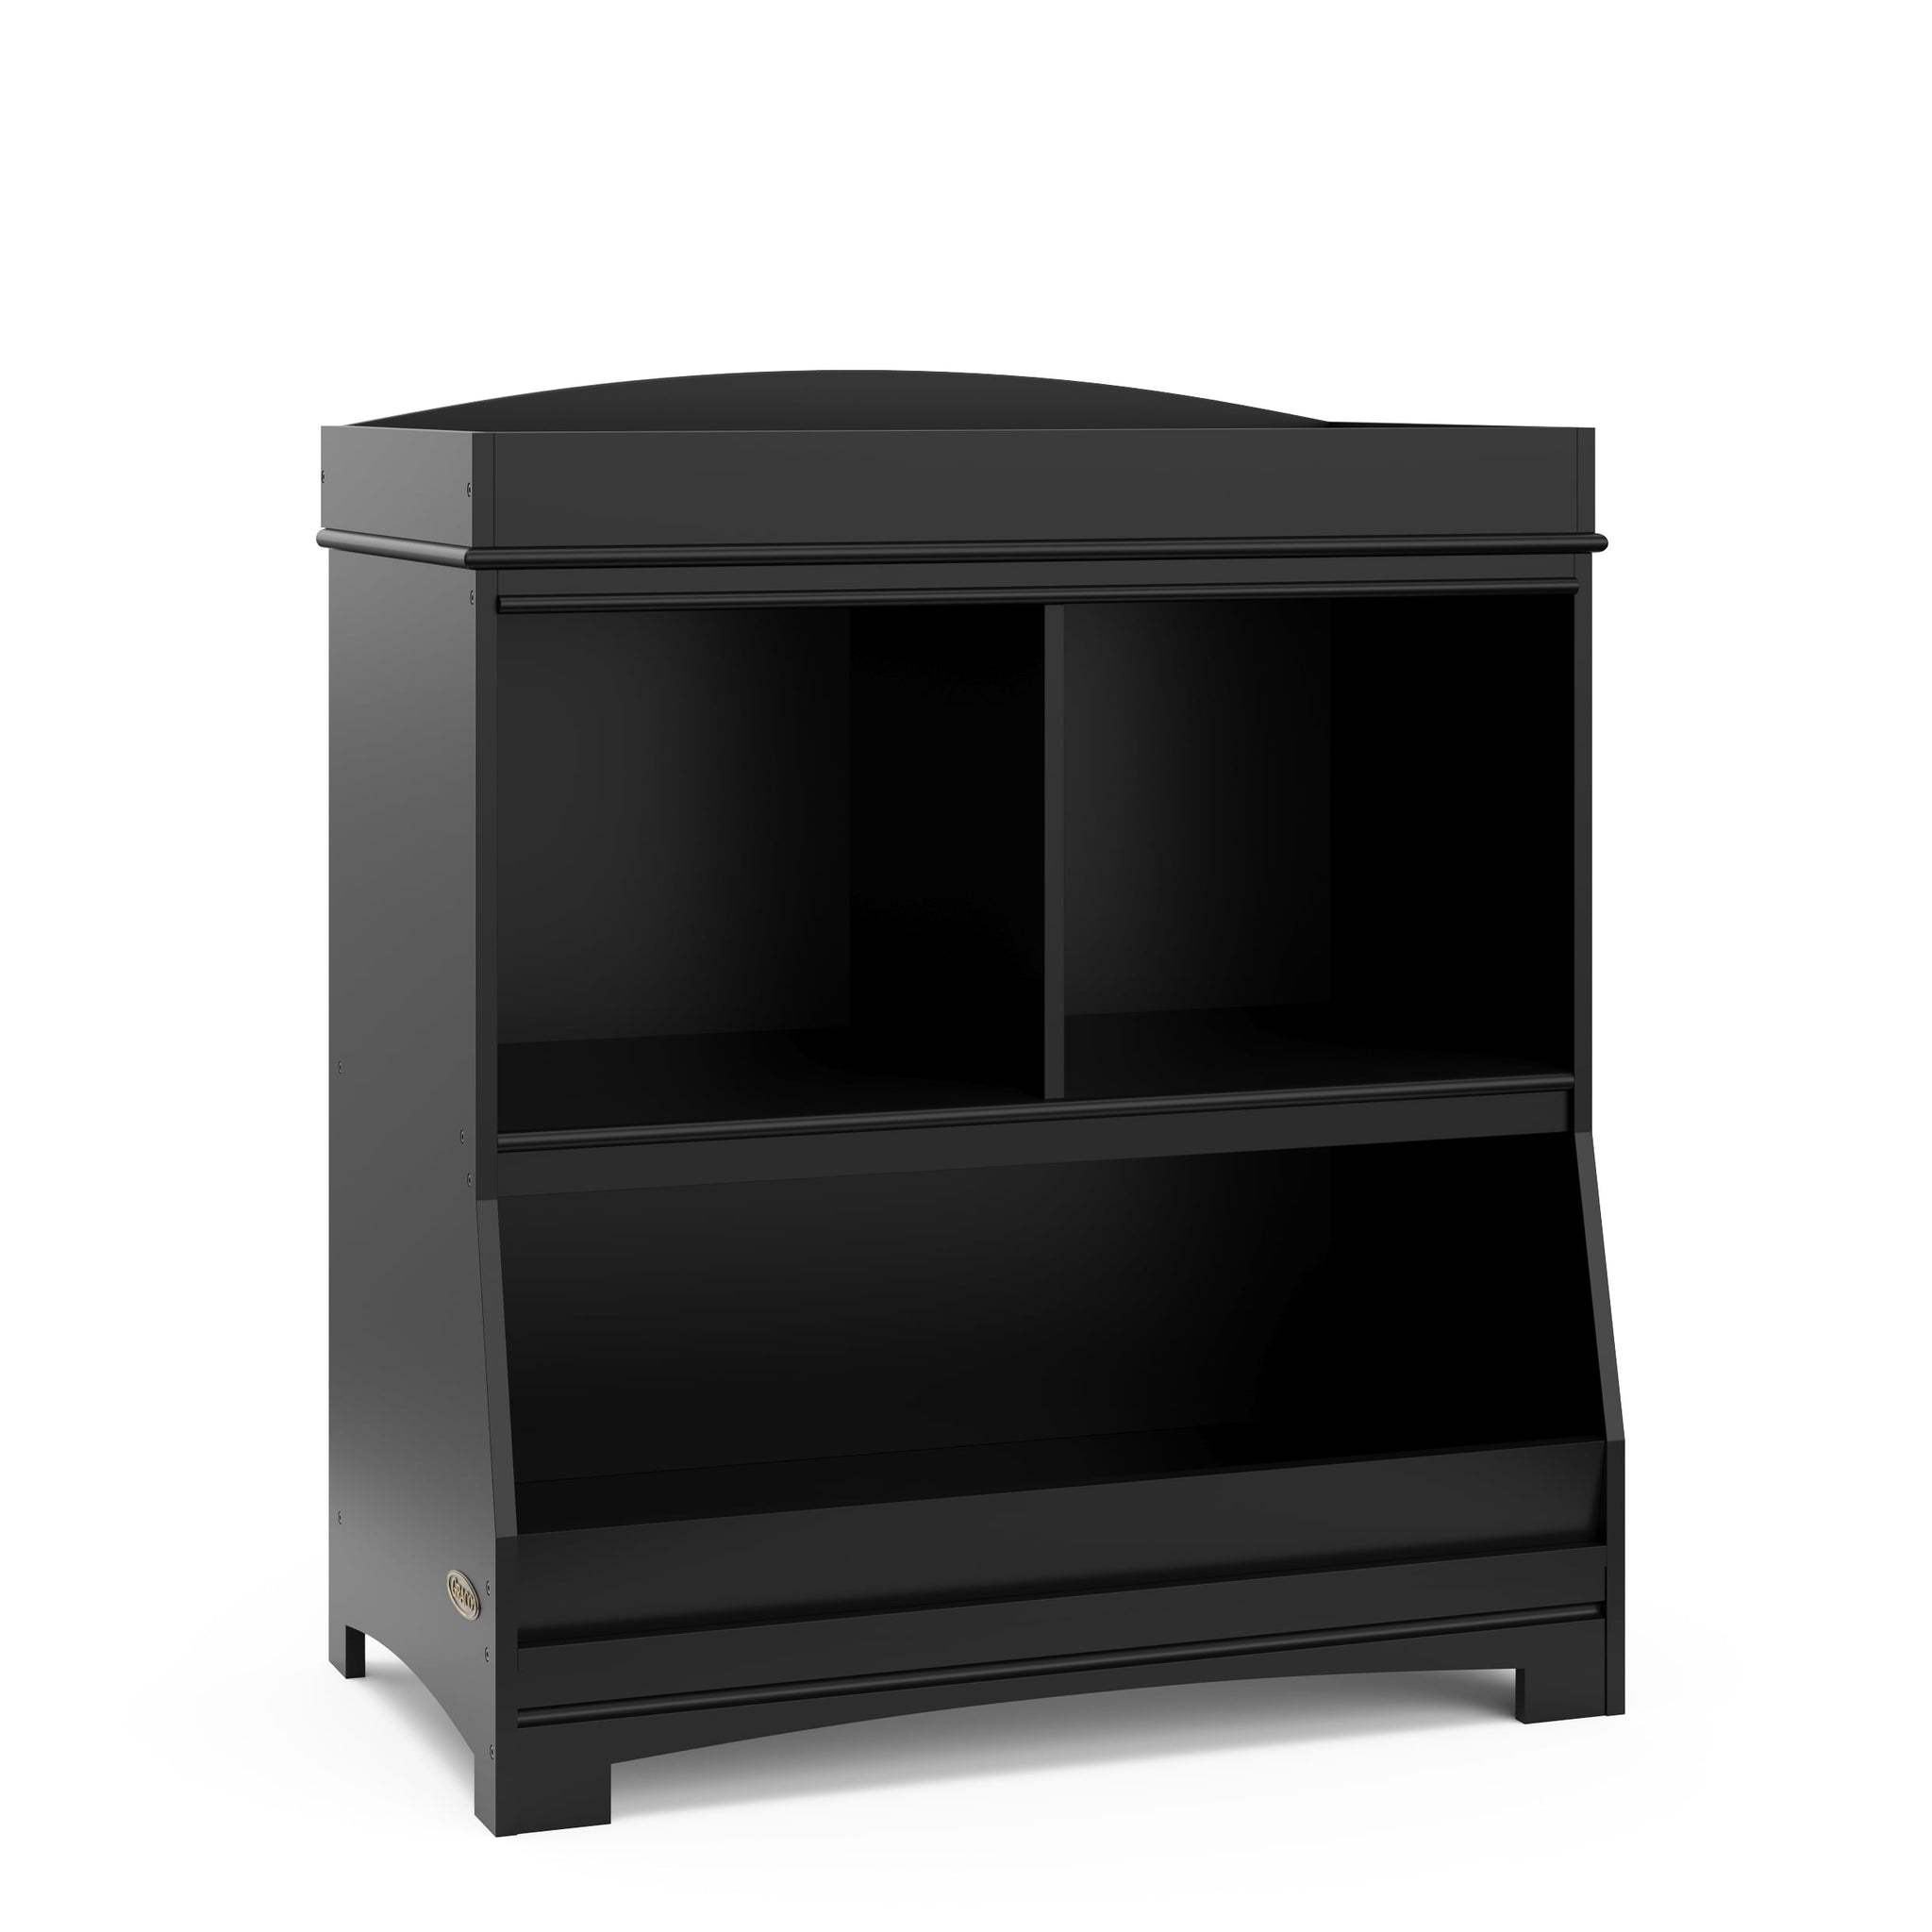  angled view black changing table with storage